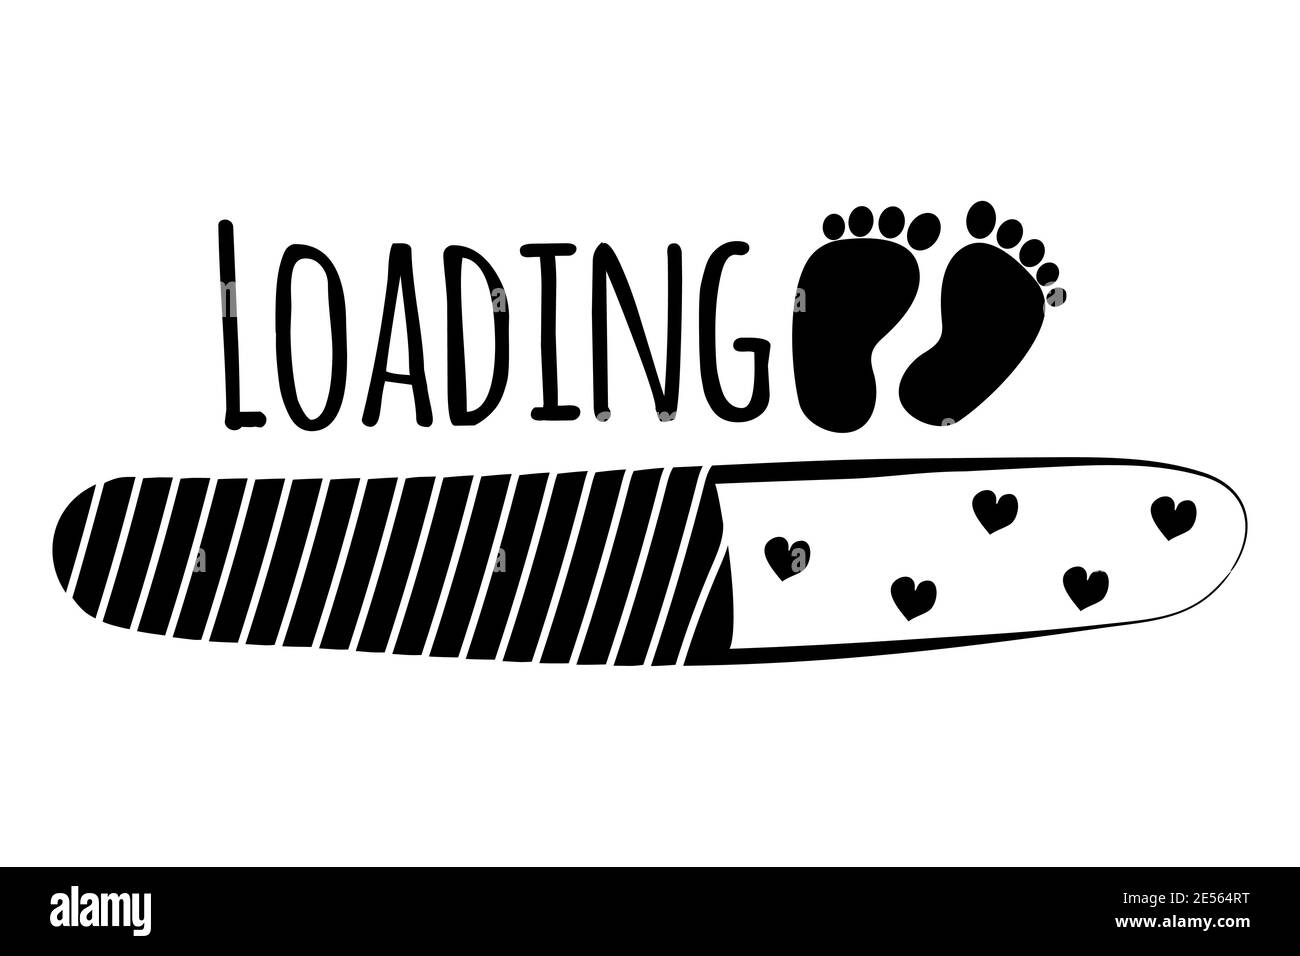 Loading With Baby Footprint And Hearts Cute Greeting With Coming Soon Newborn For Pregnant Mother Monochrome Print Poster Isolated On White Backgro Stock Vector Image Art Alamy